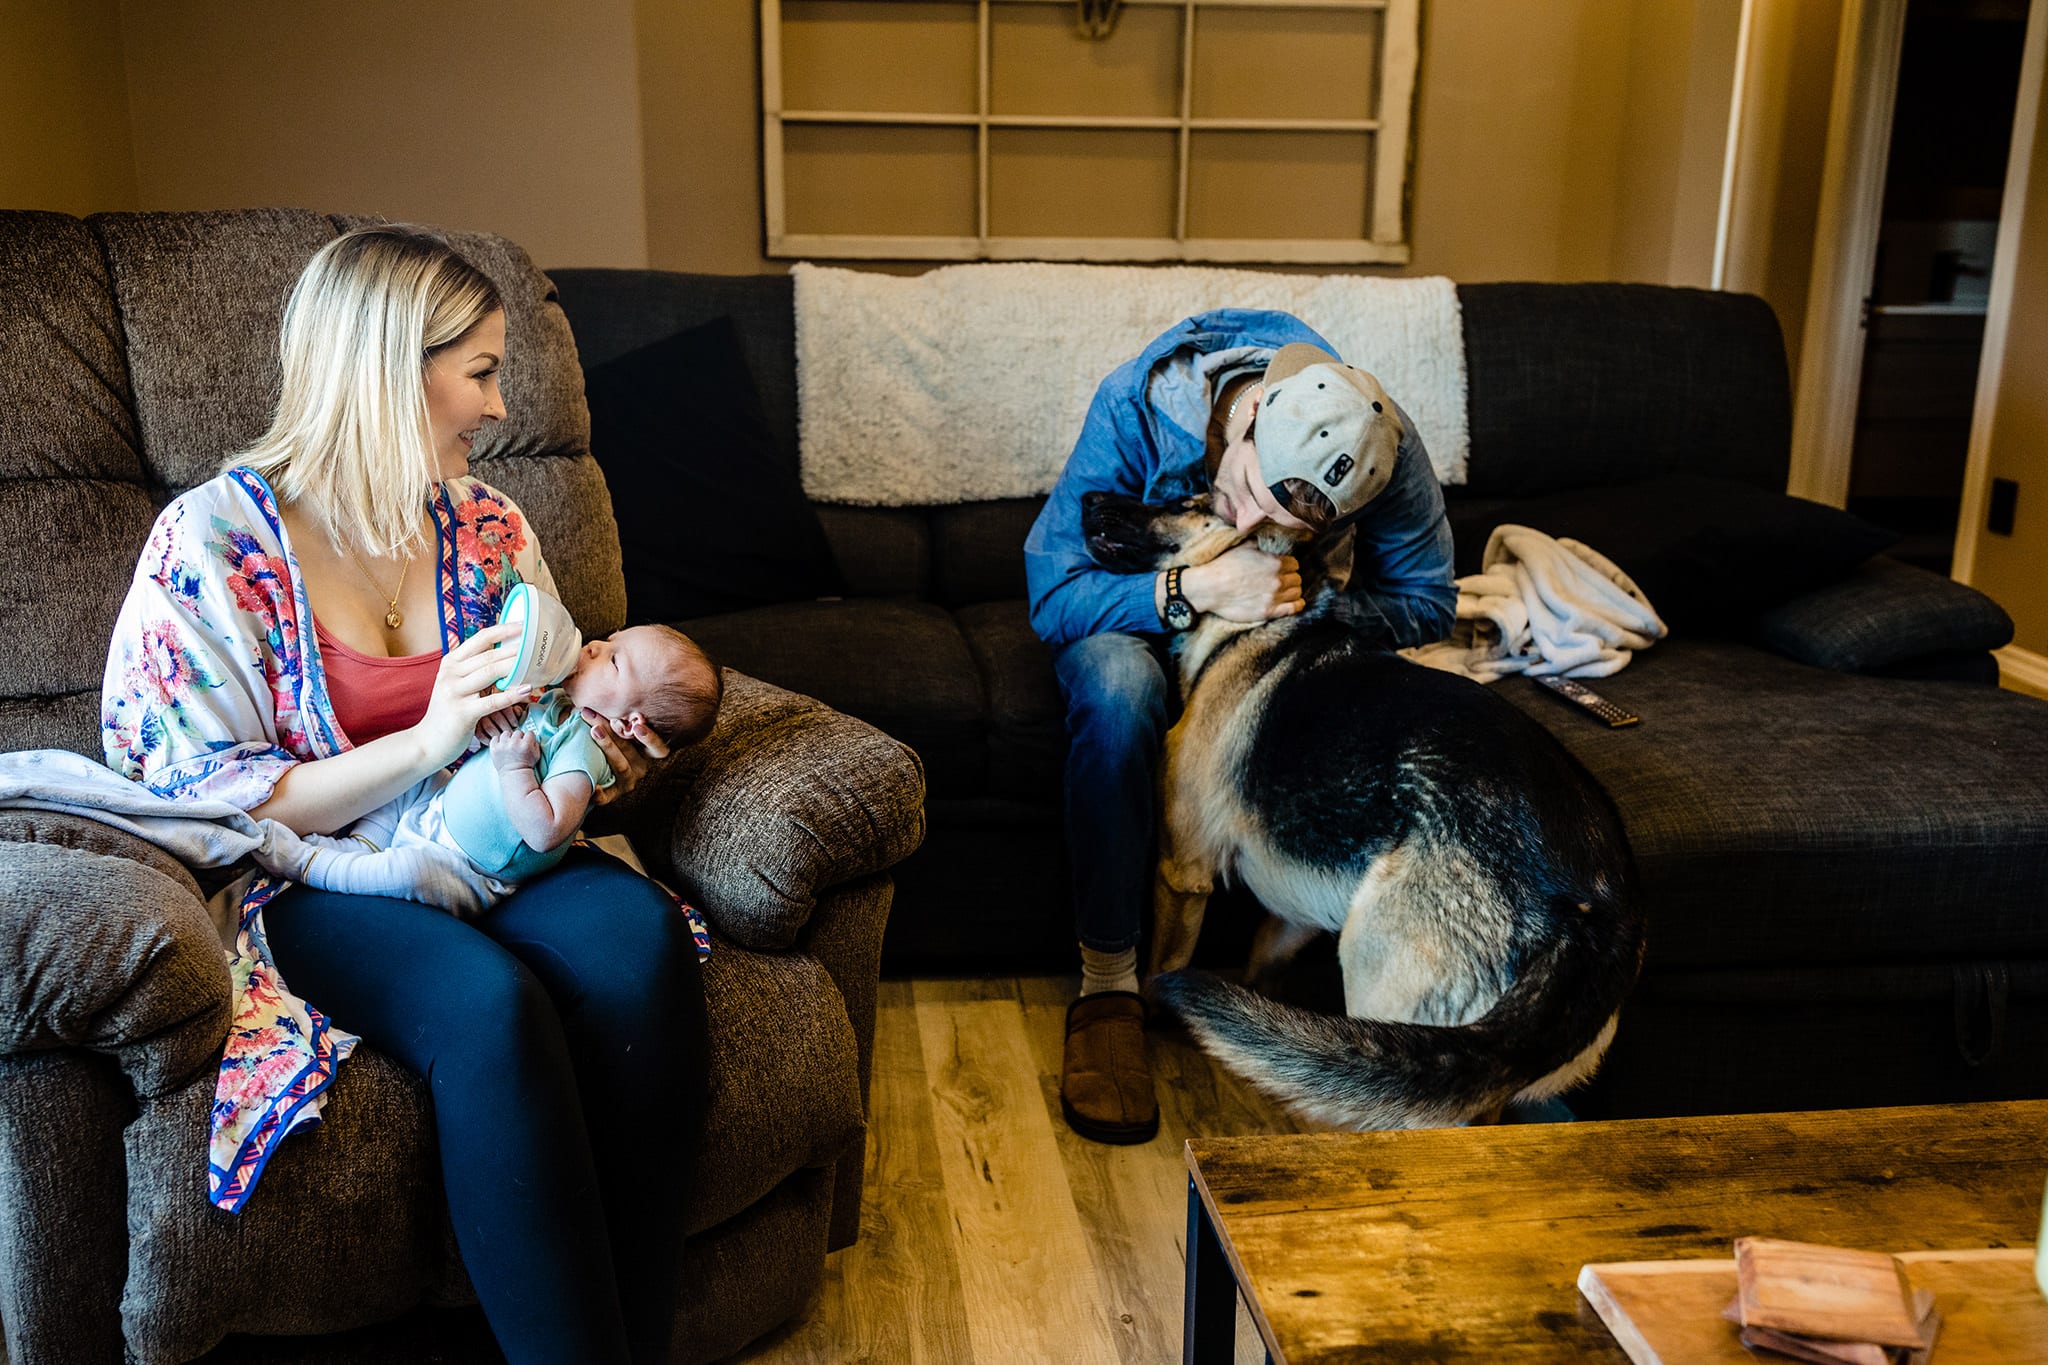 dad in ballcap plays with dog while mom feeds newborn with bottle during at-home Cornwall newborn photos